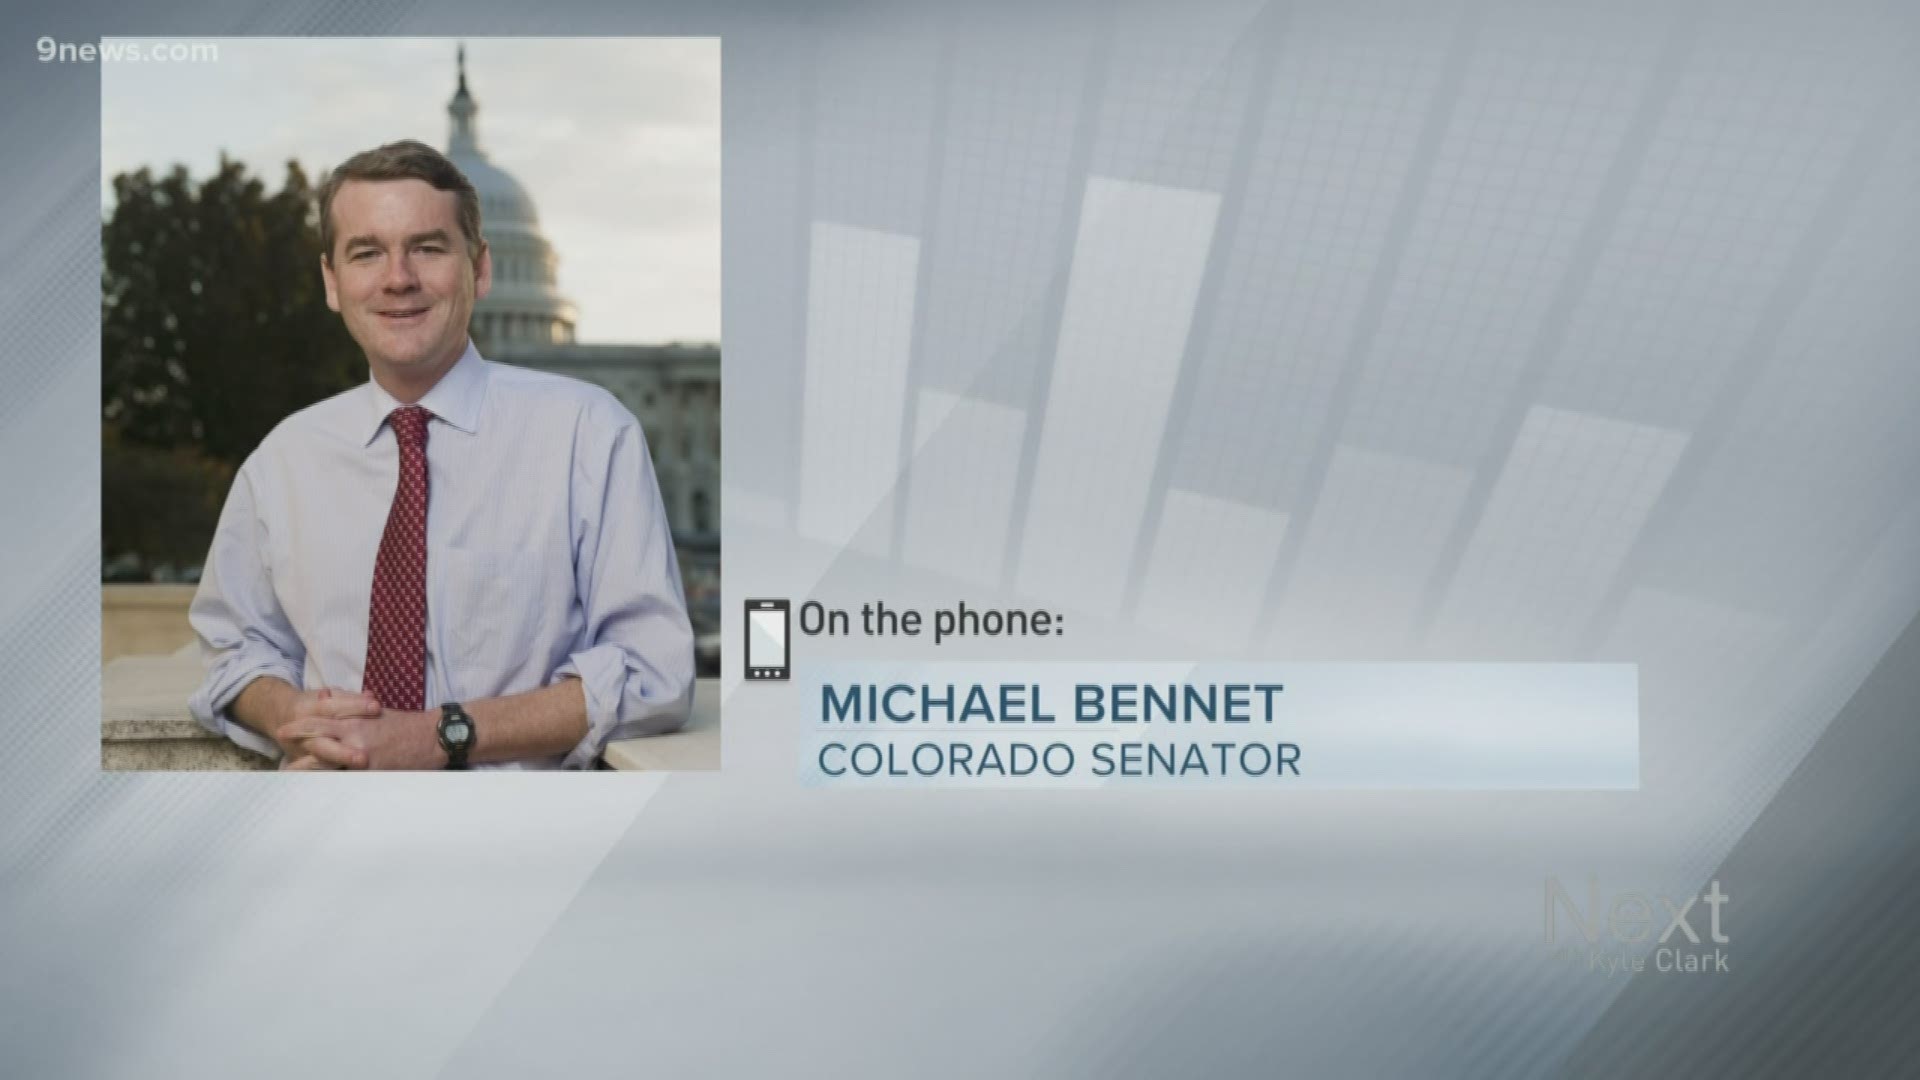 Colorado Sen. Michael Bennet had a lot to say this morning before things began. But we haven't heard much from anyone else.